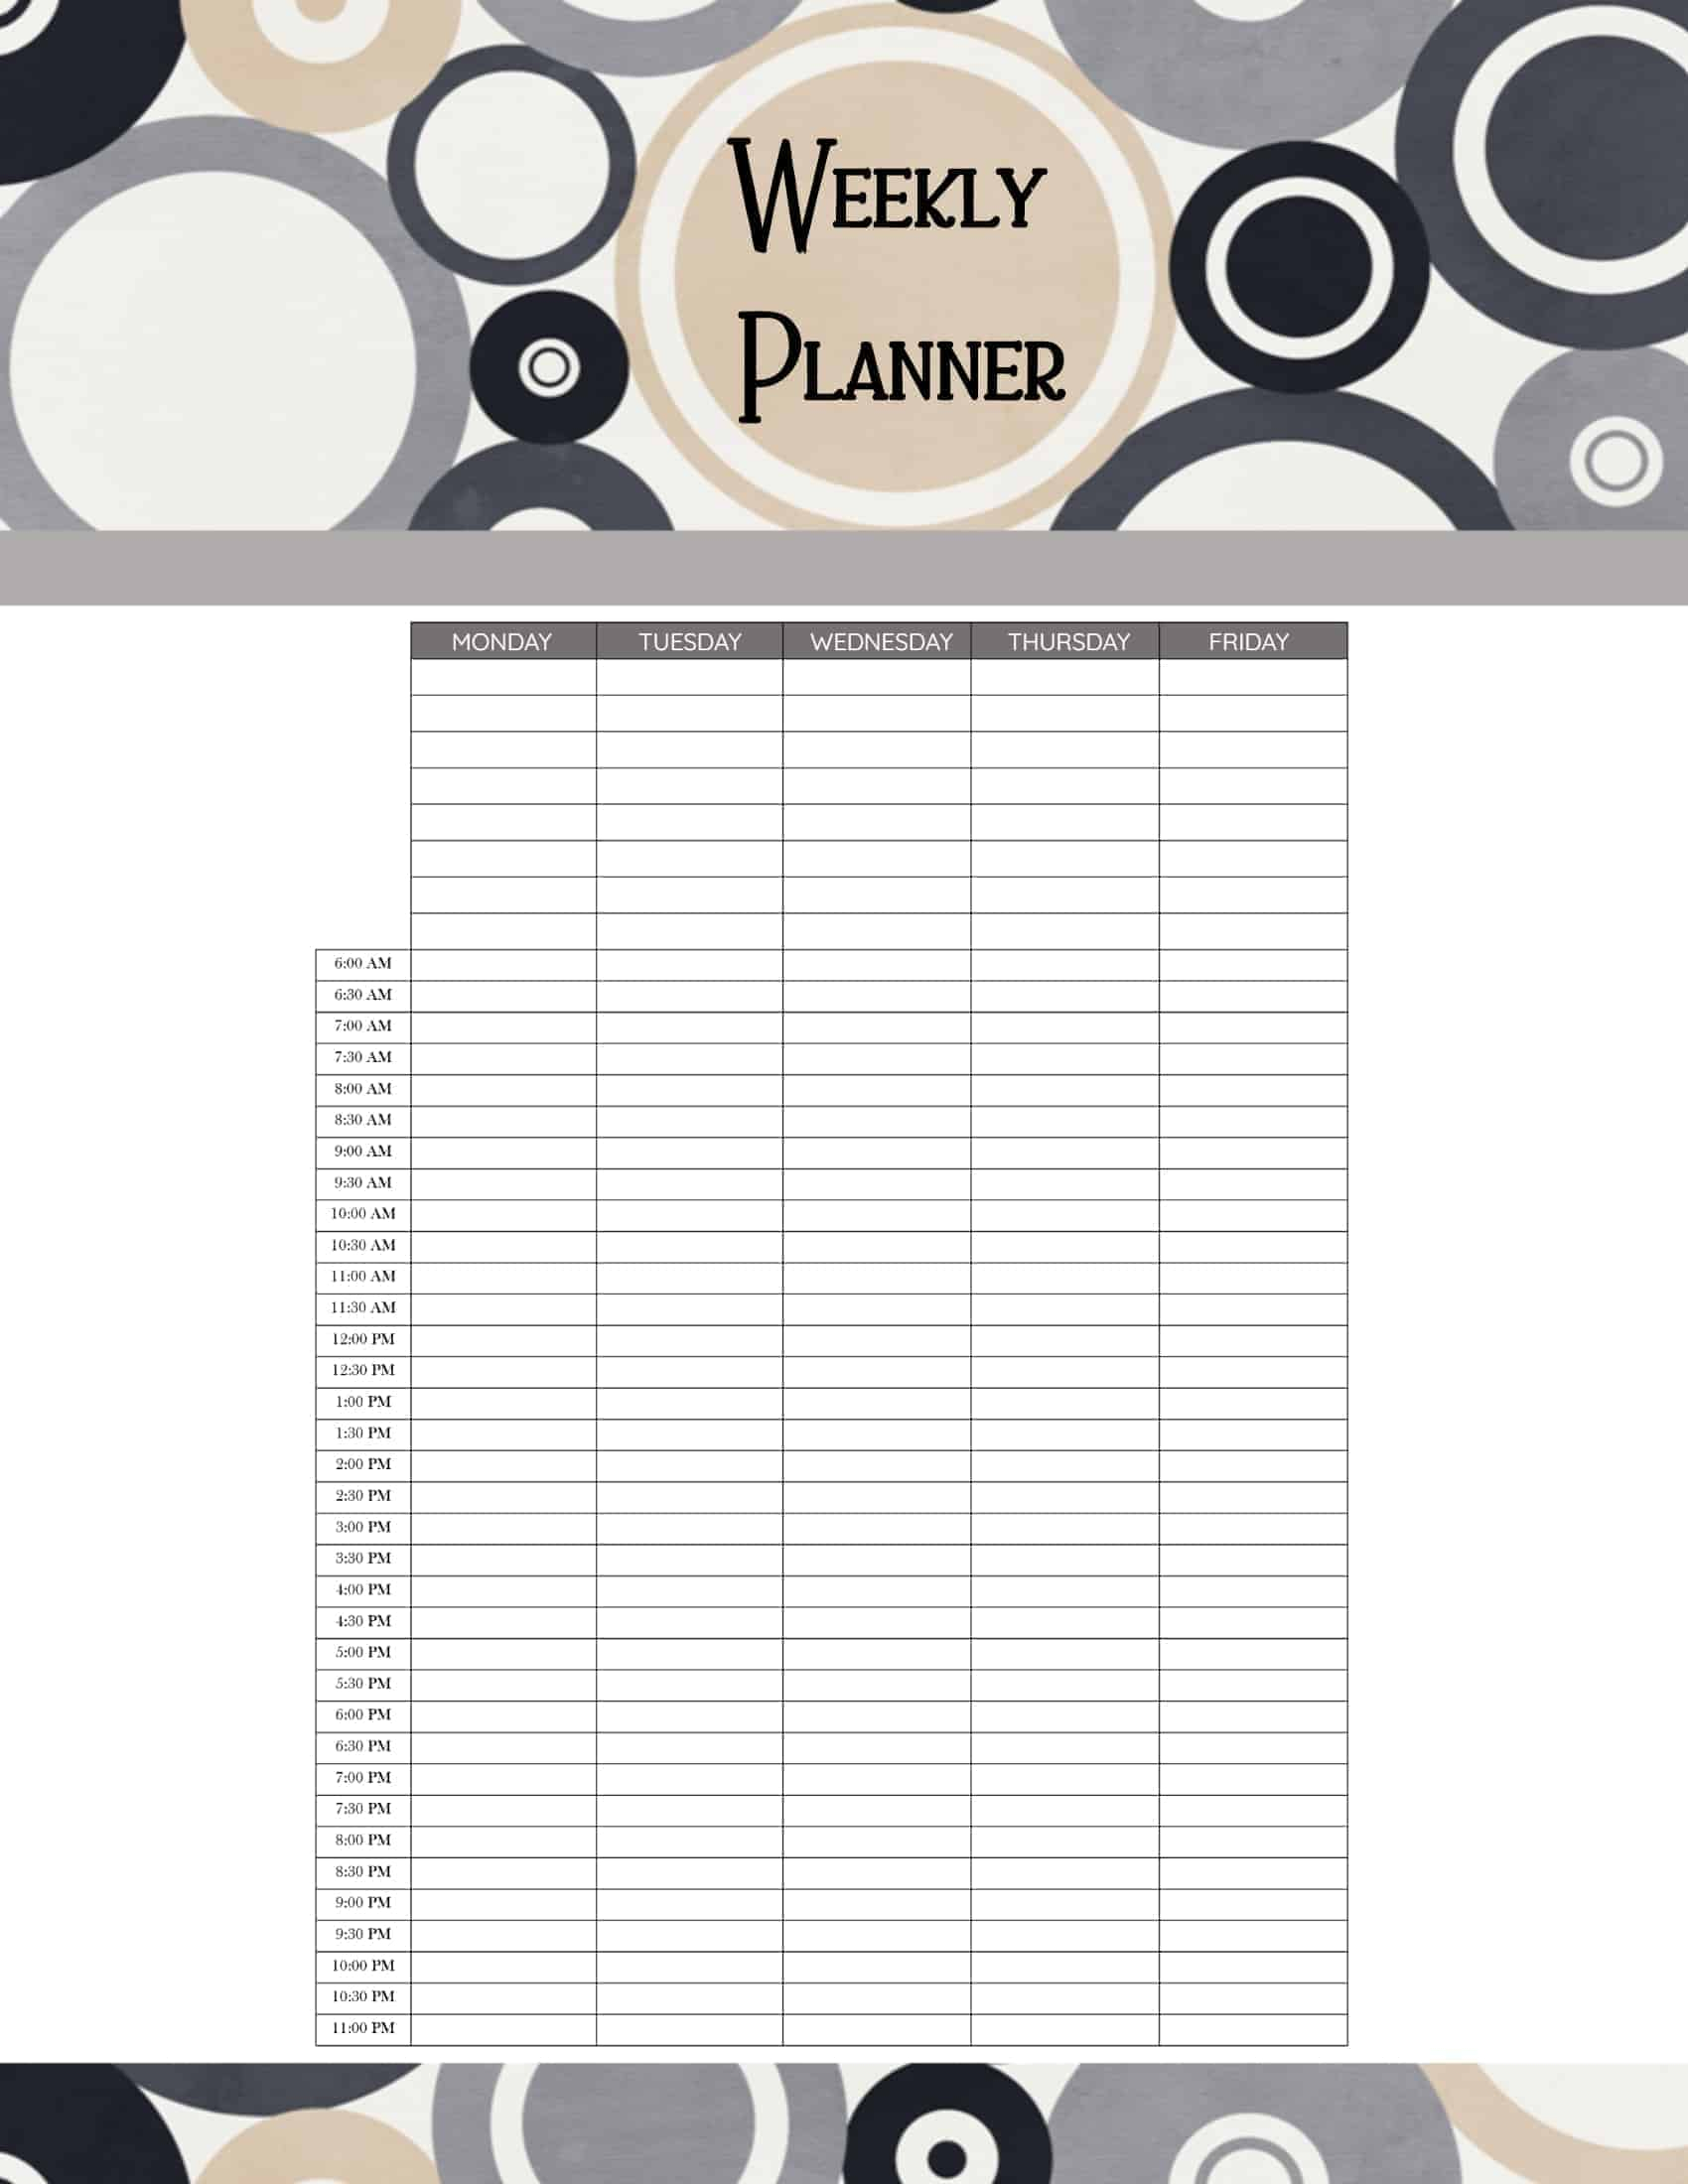 Free Printable Hourly Planner  Daily, Weekly Or Monthly inside Weekly Hourly Scheudle Template